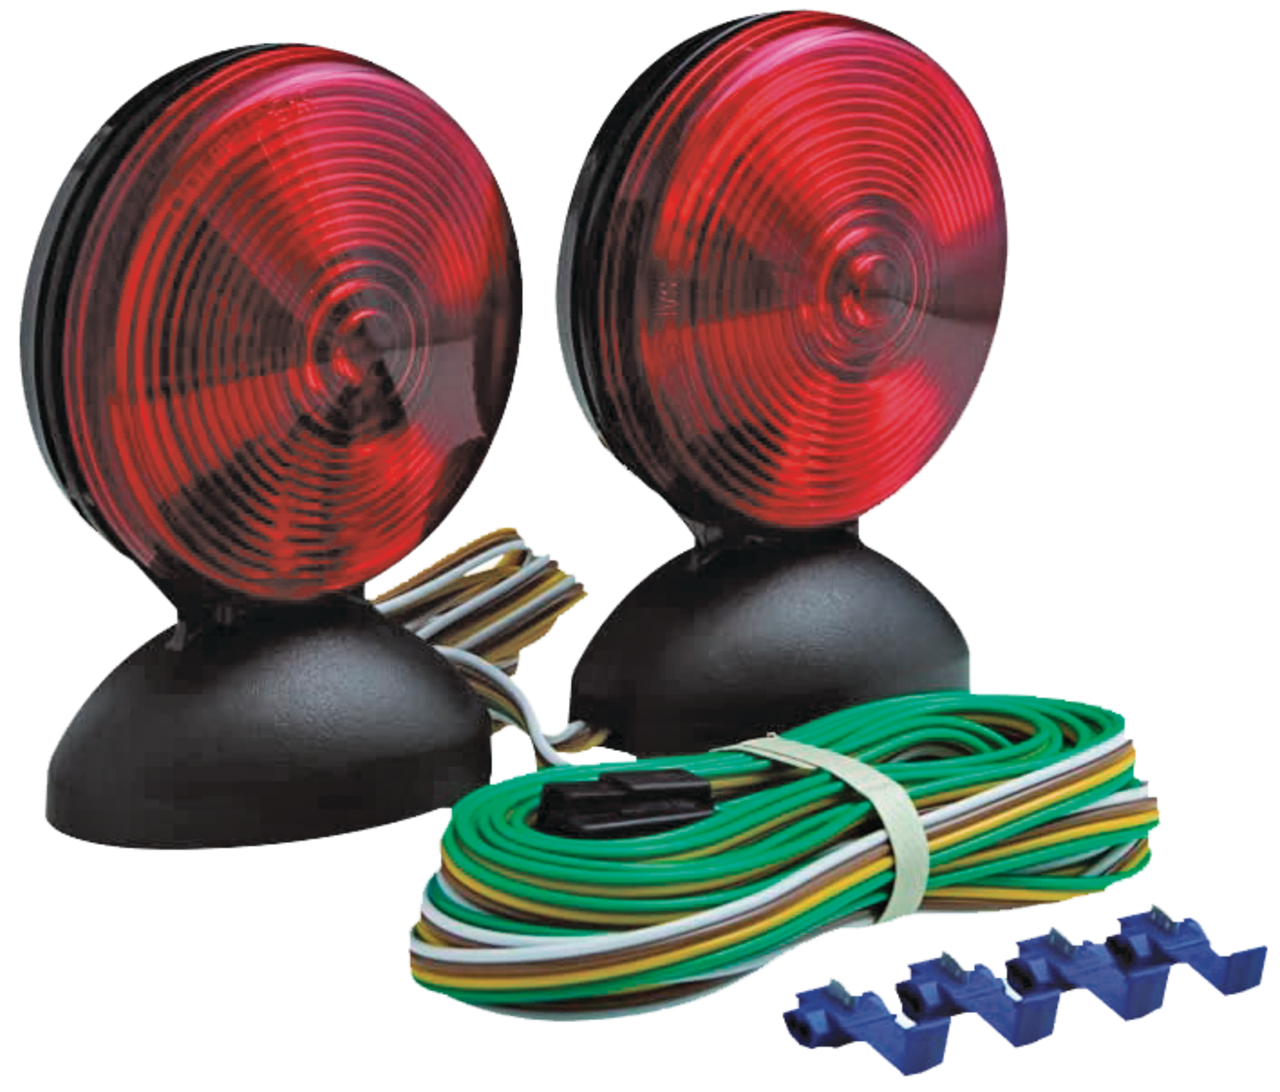 Hopkins Towing Solution LED Wireless Magnetic Tow Light